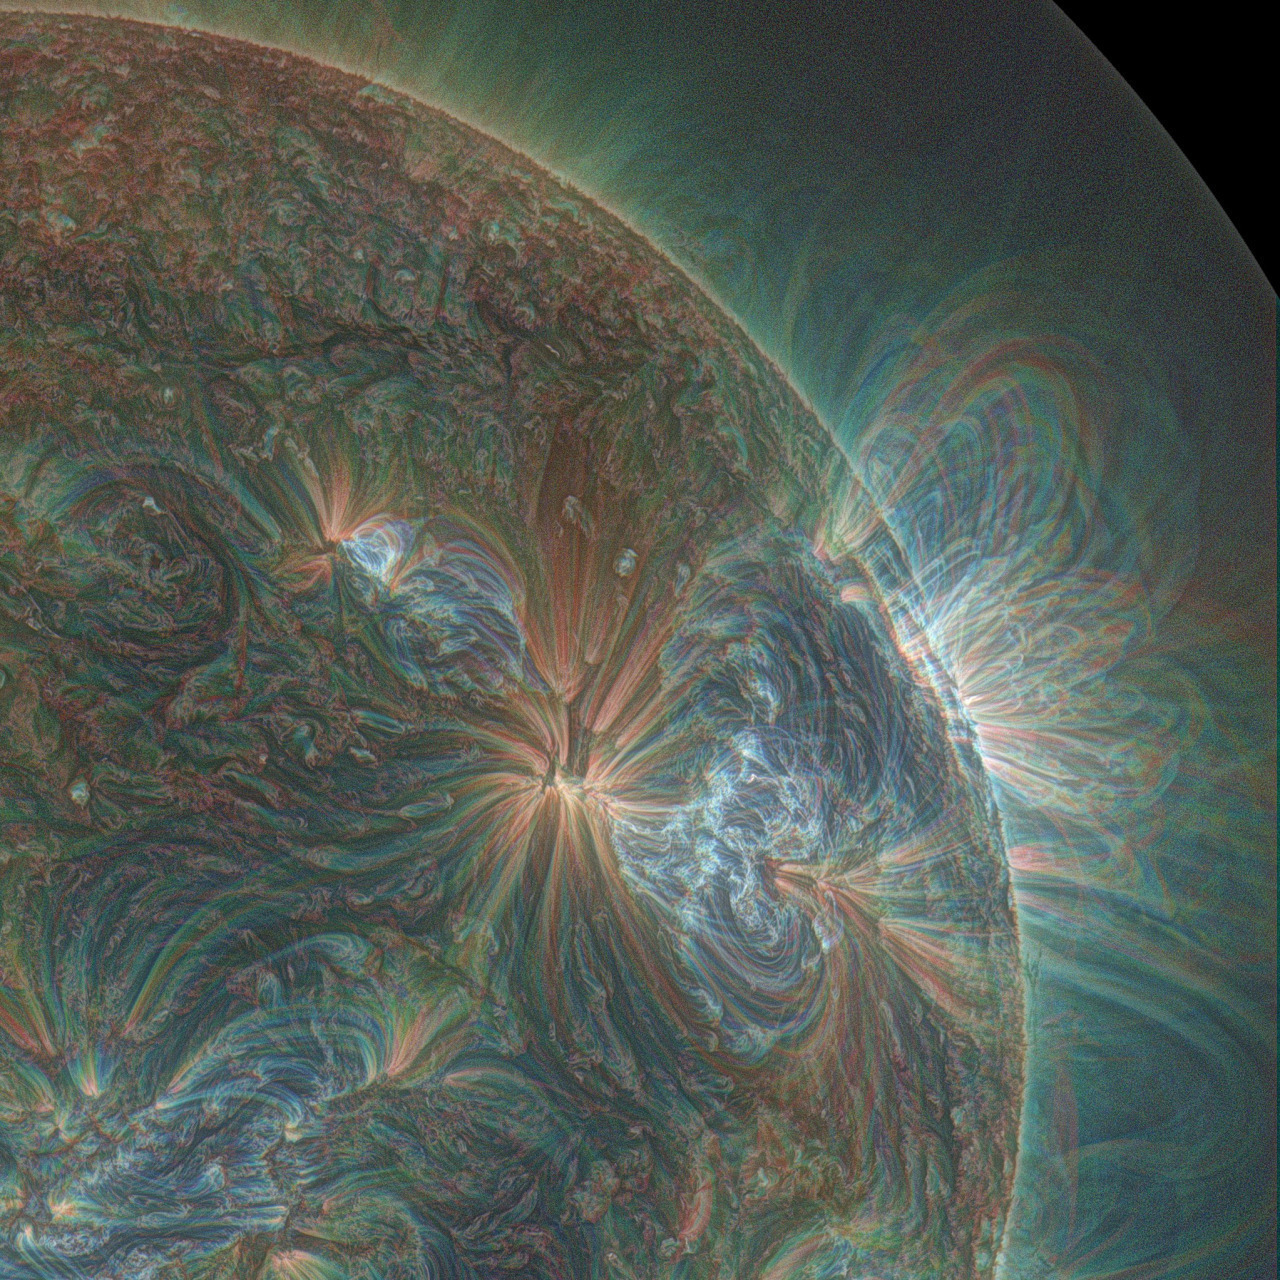 A photograph of the sun through an ultraviolet lens. It looks kinda oily, slick and rainbowish.